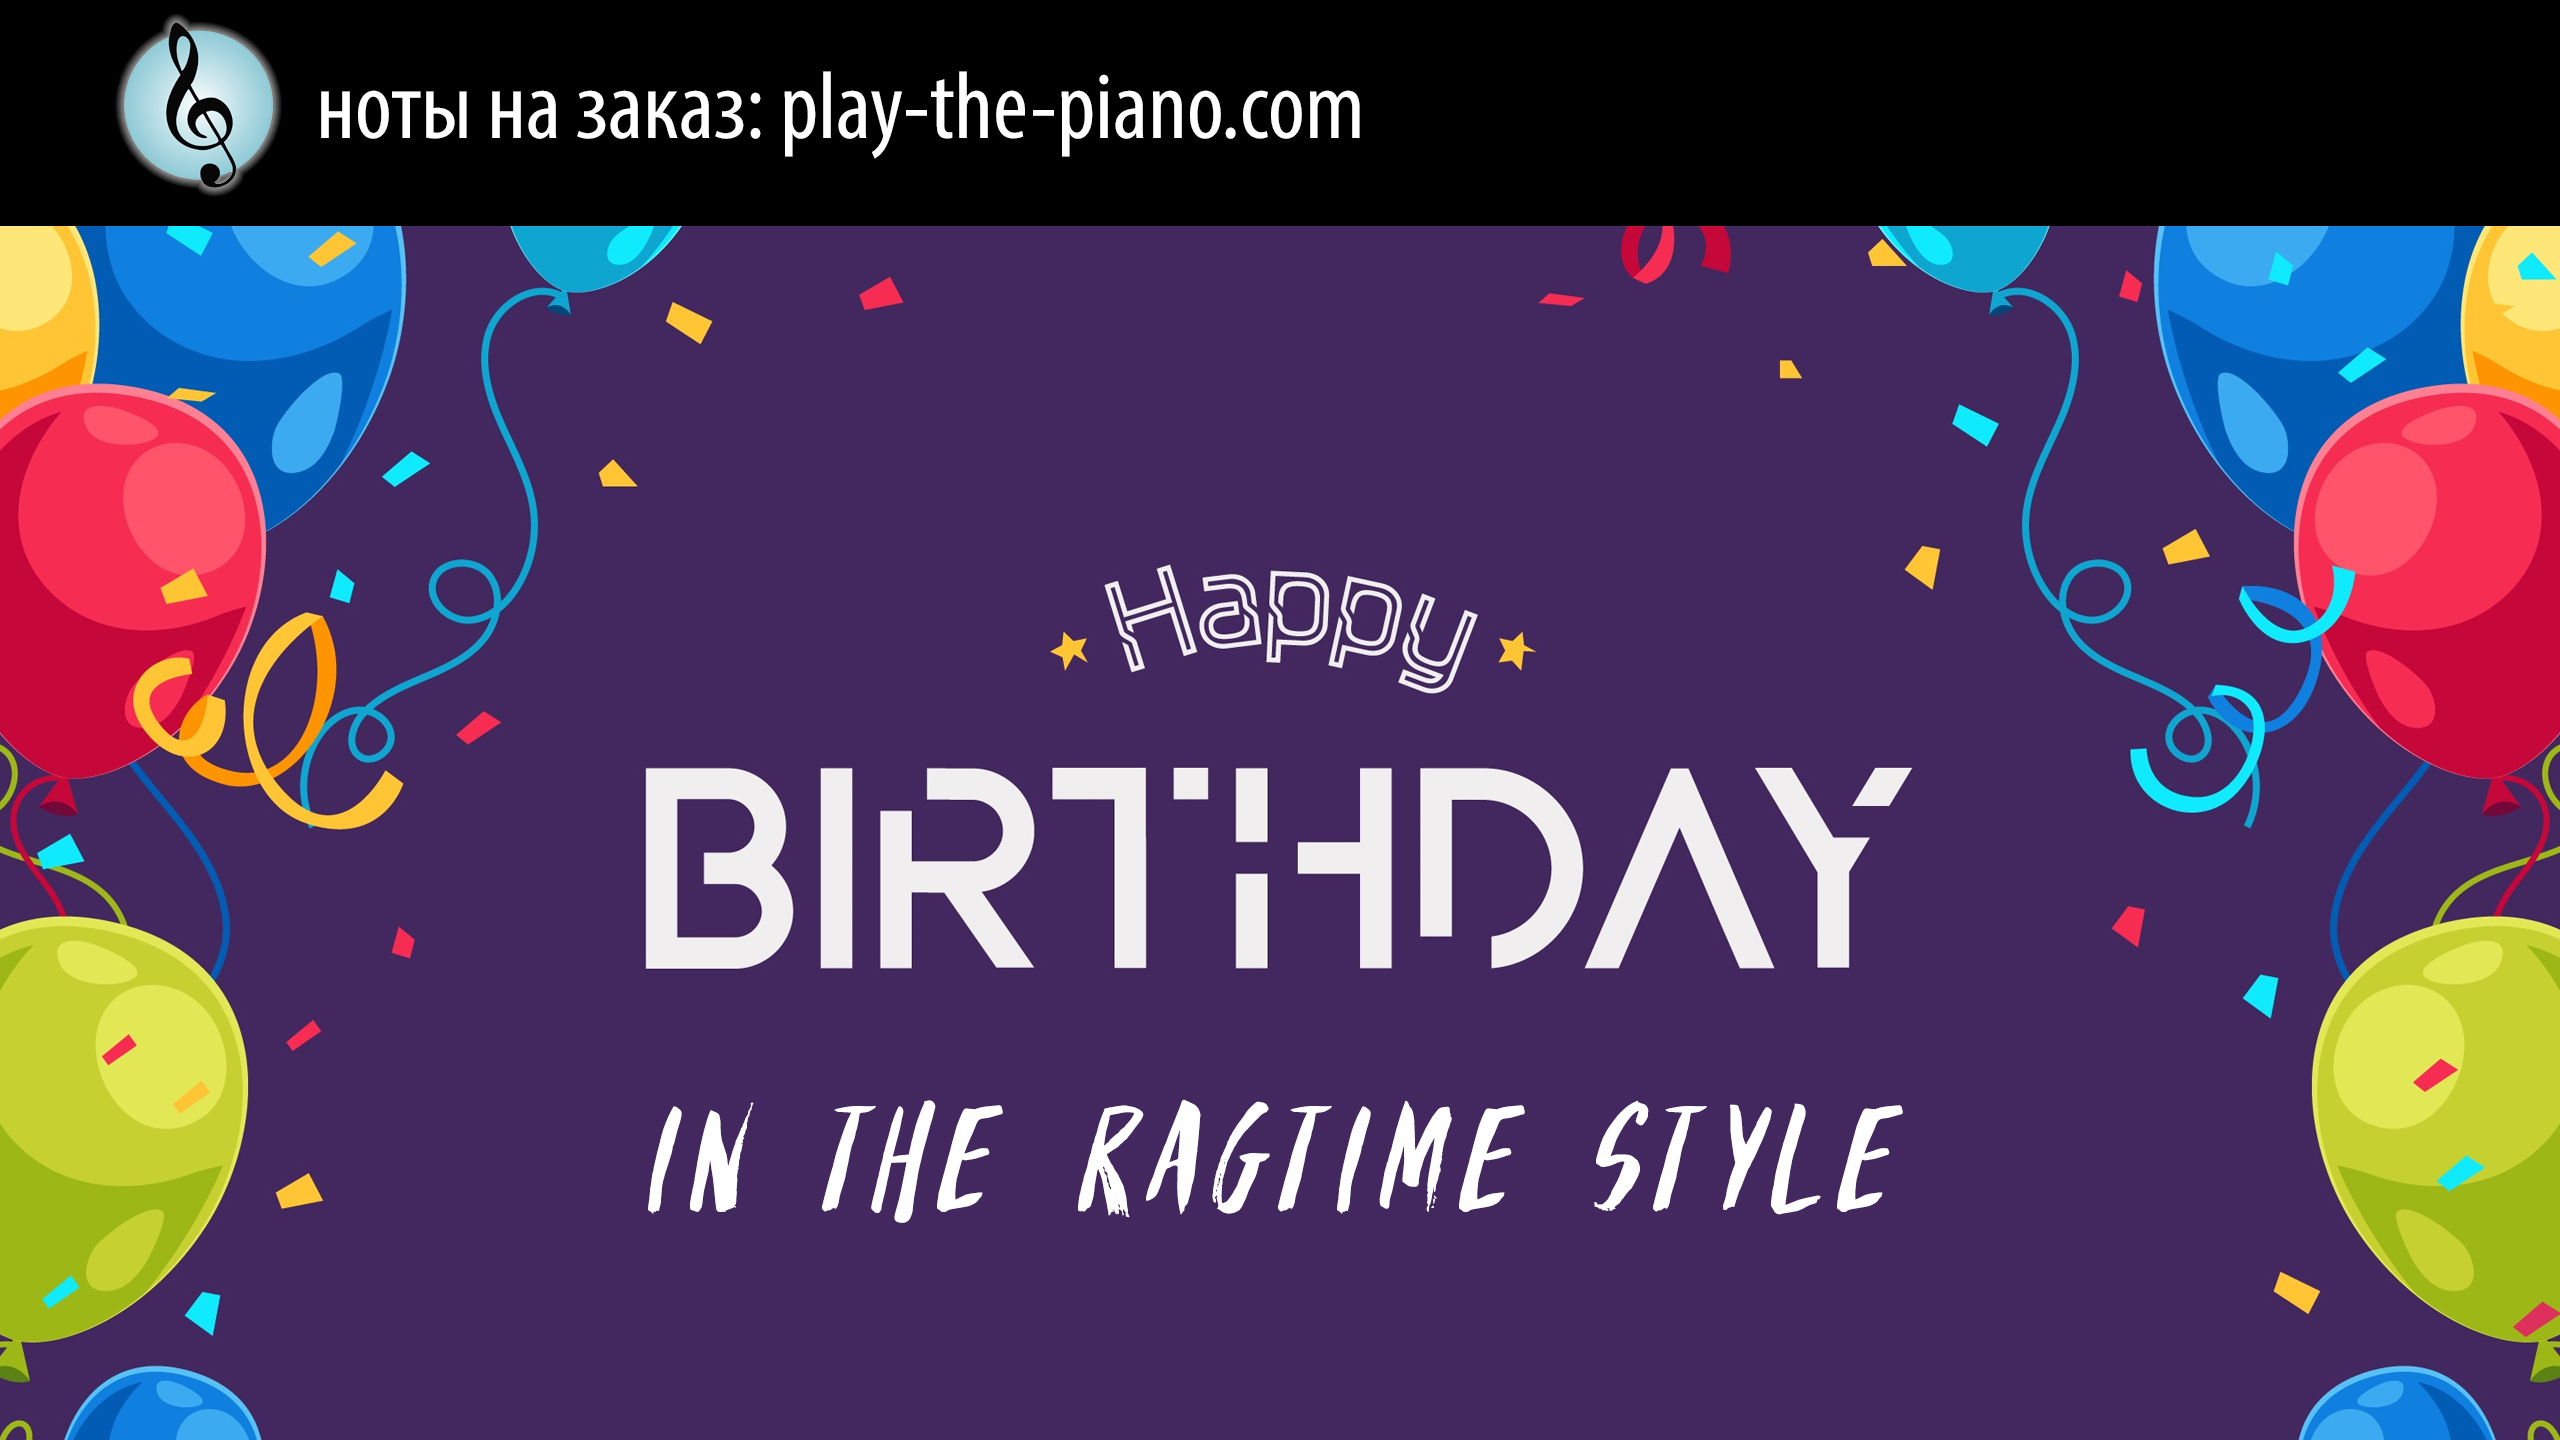 Happy Birthday to You in ragtime